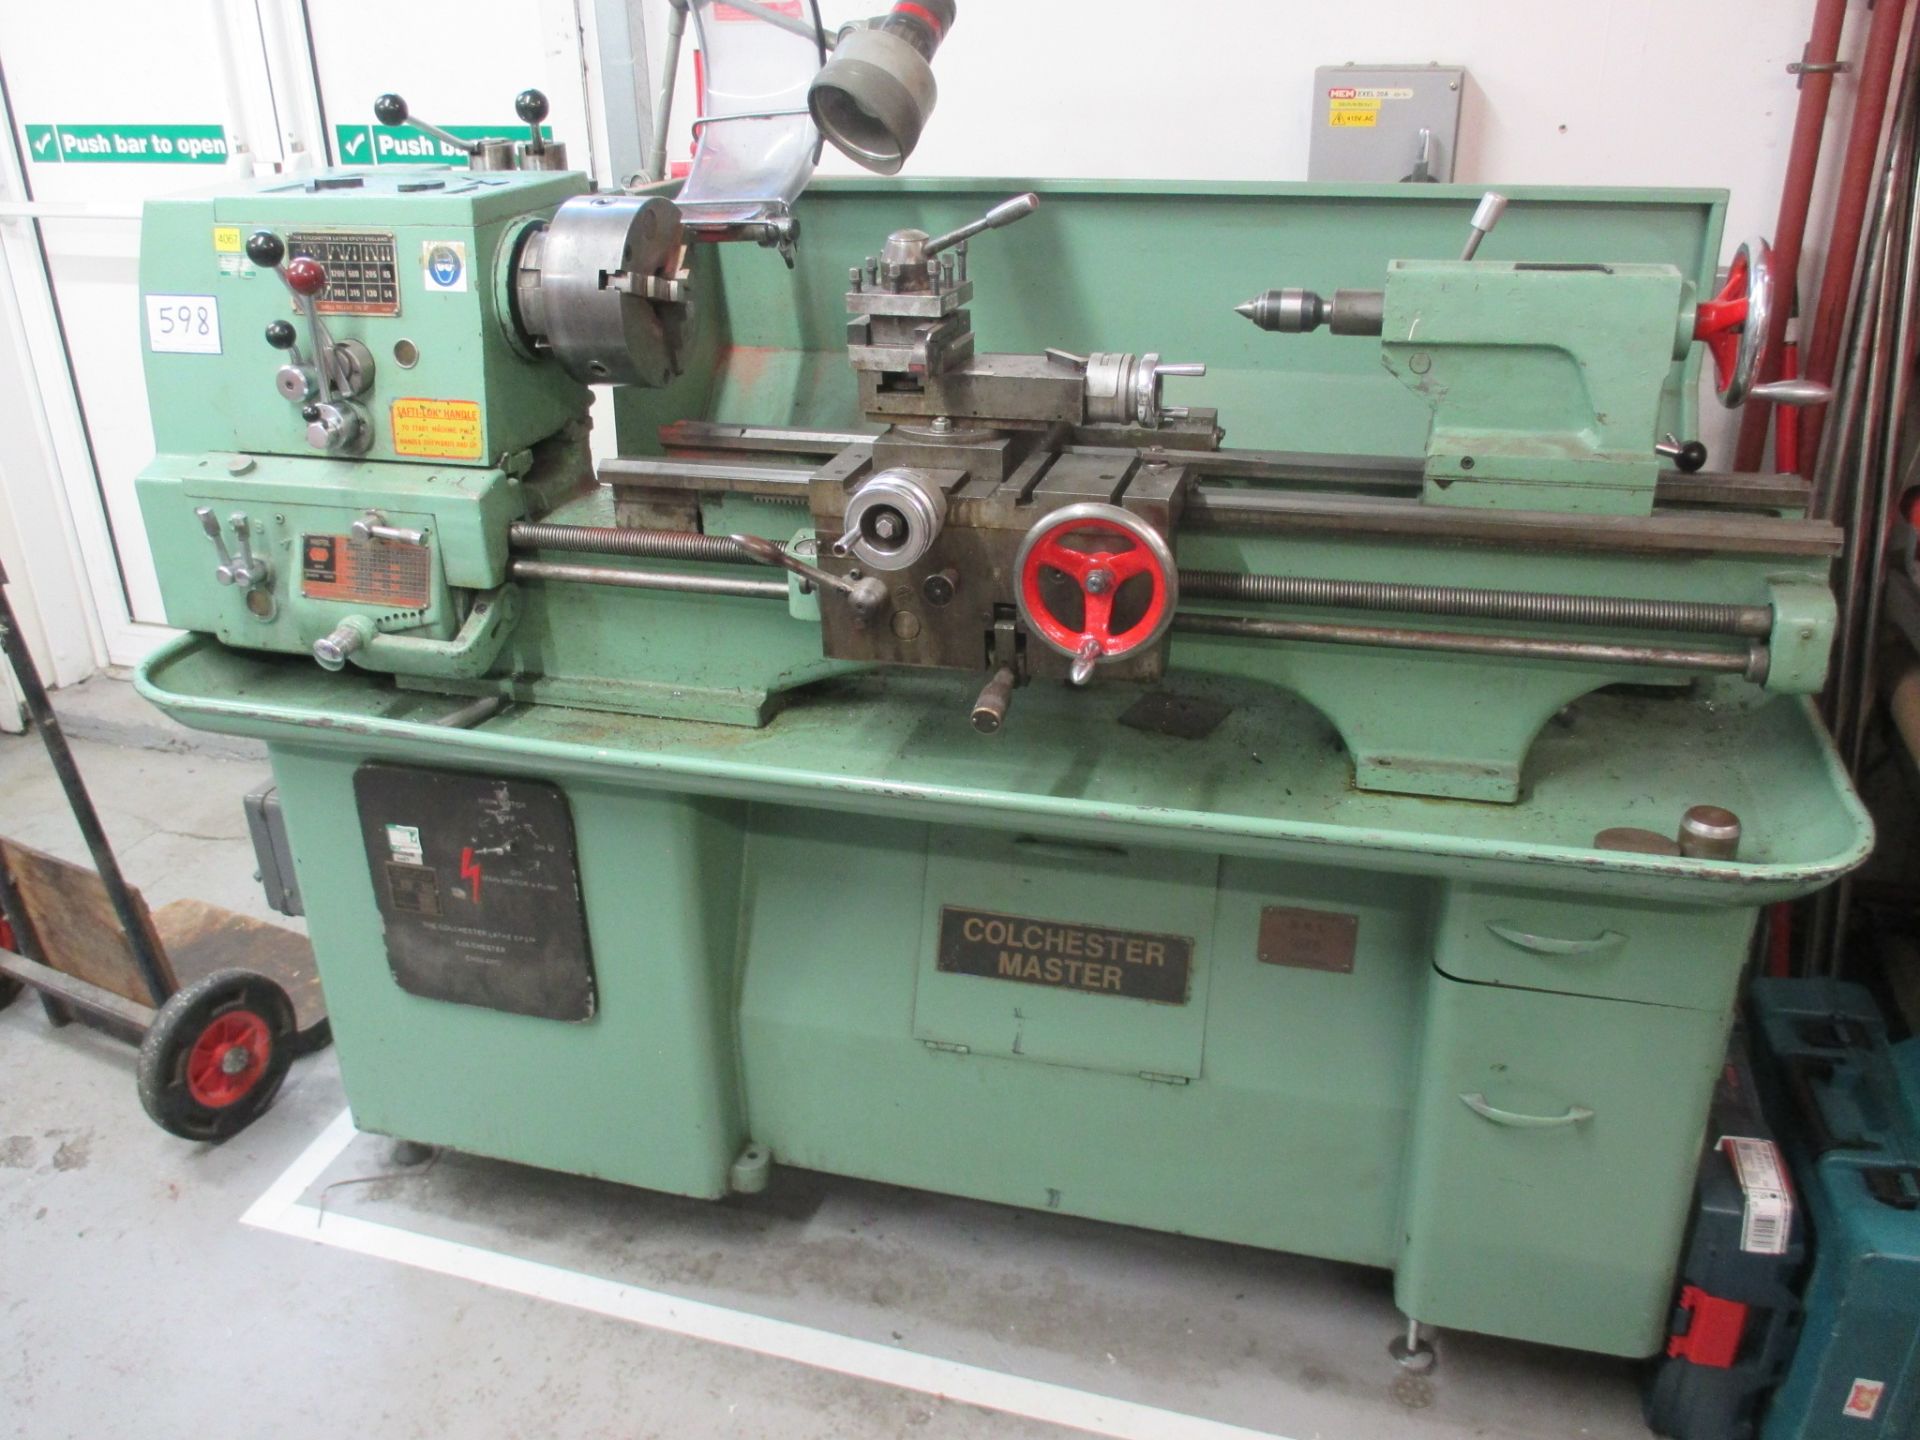 1: Colchester, Master 61, Lathe, Serial Number: F3/73747